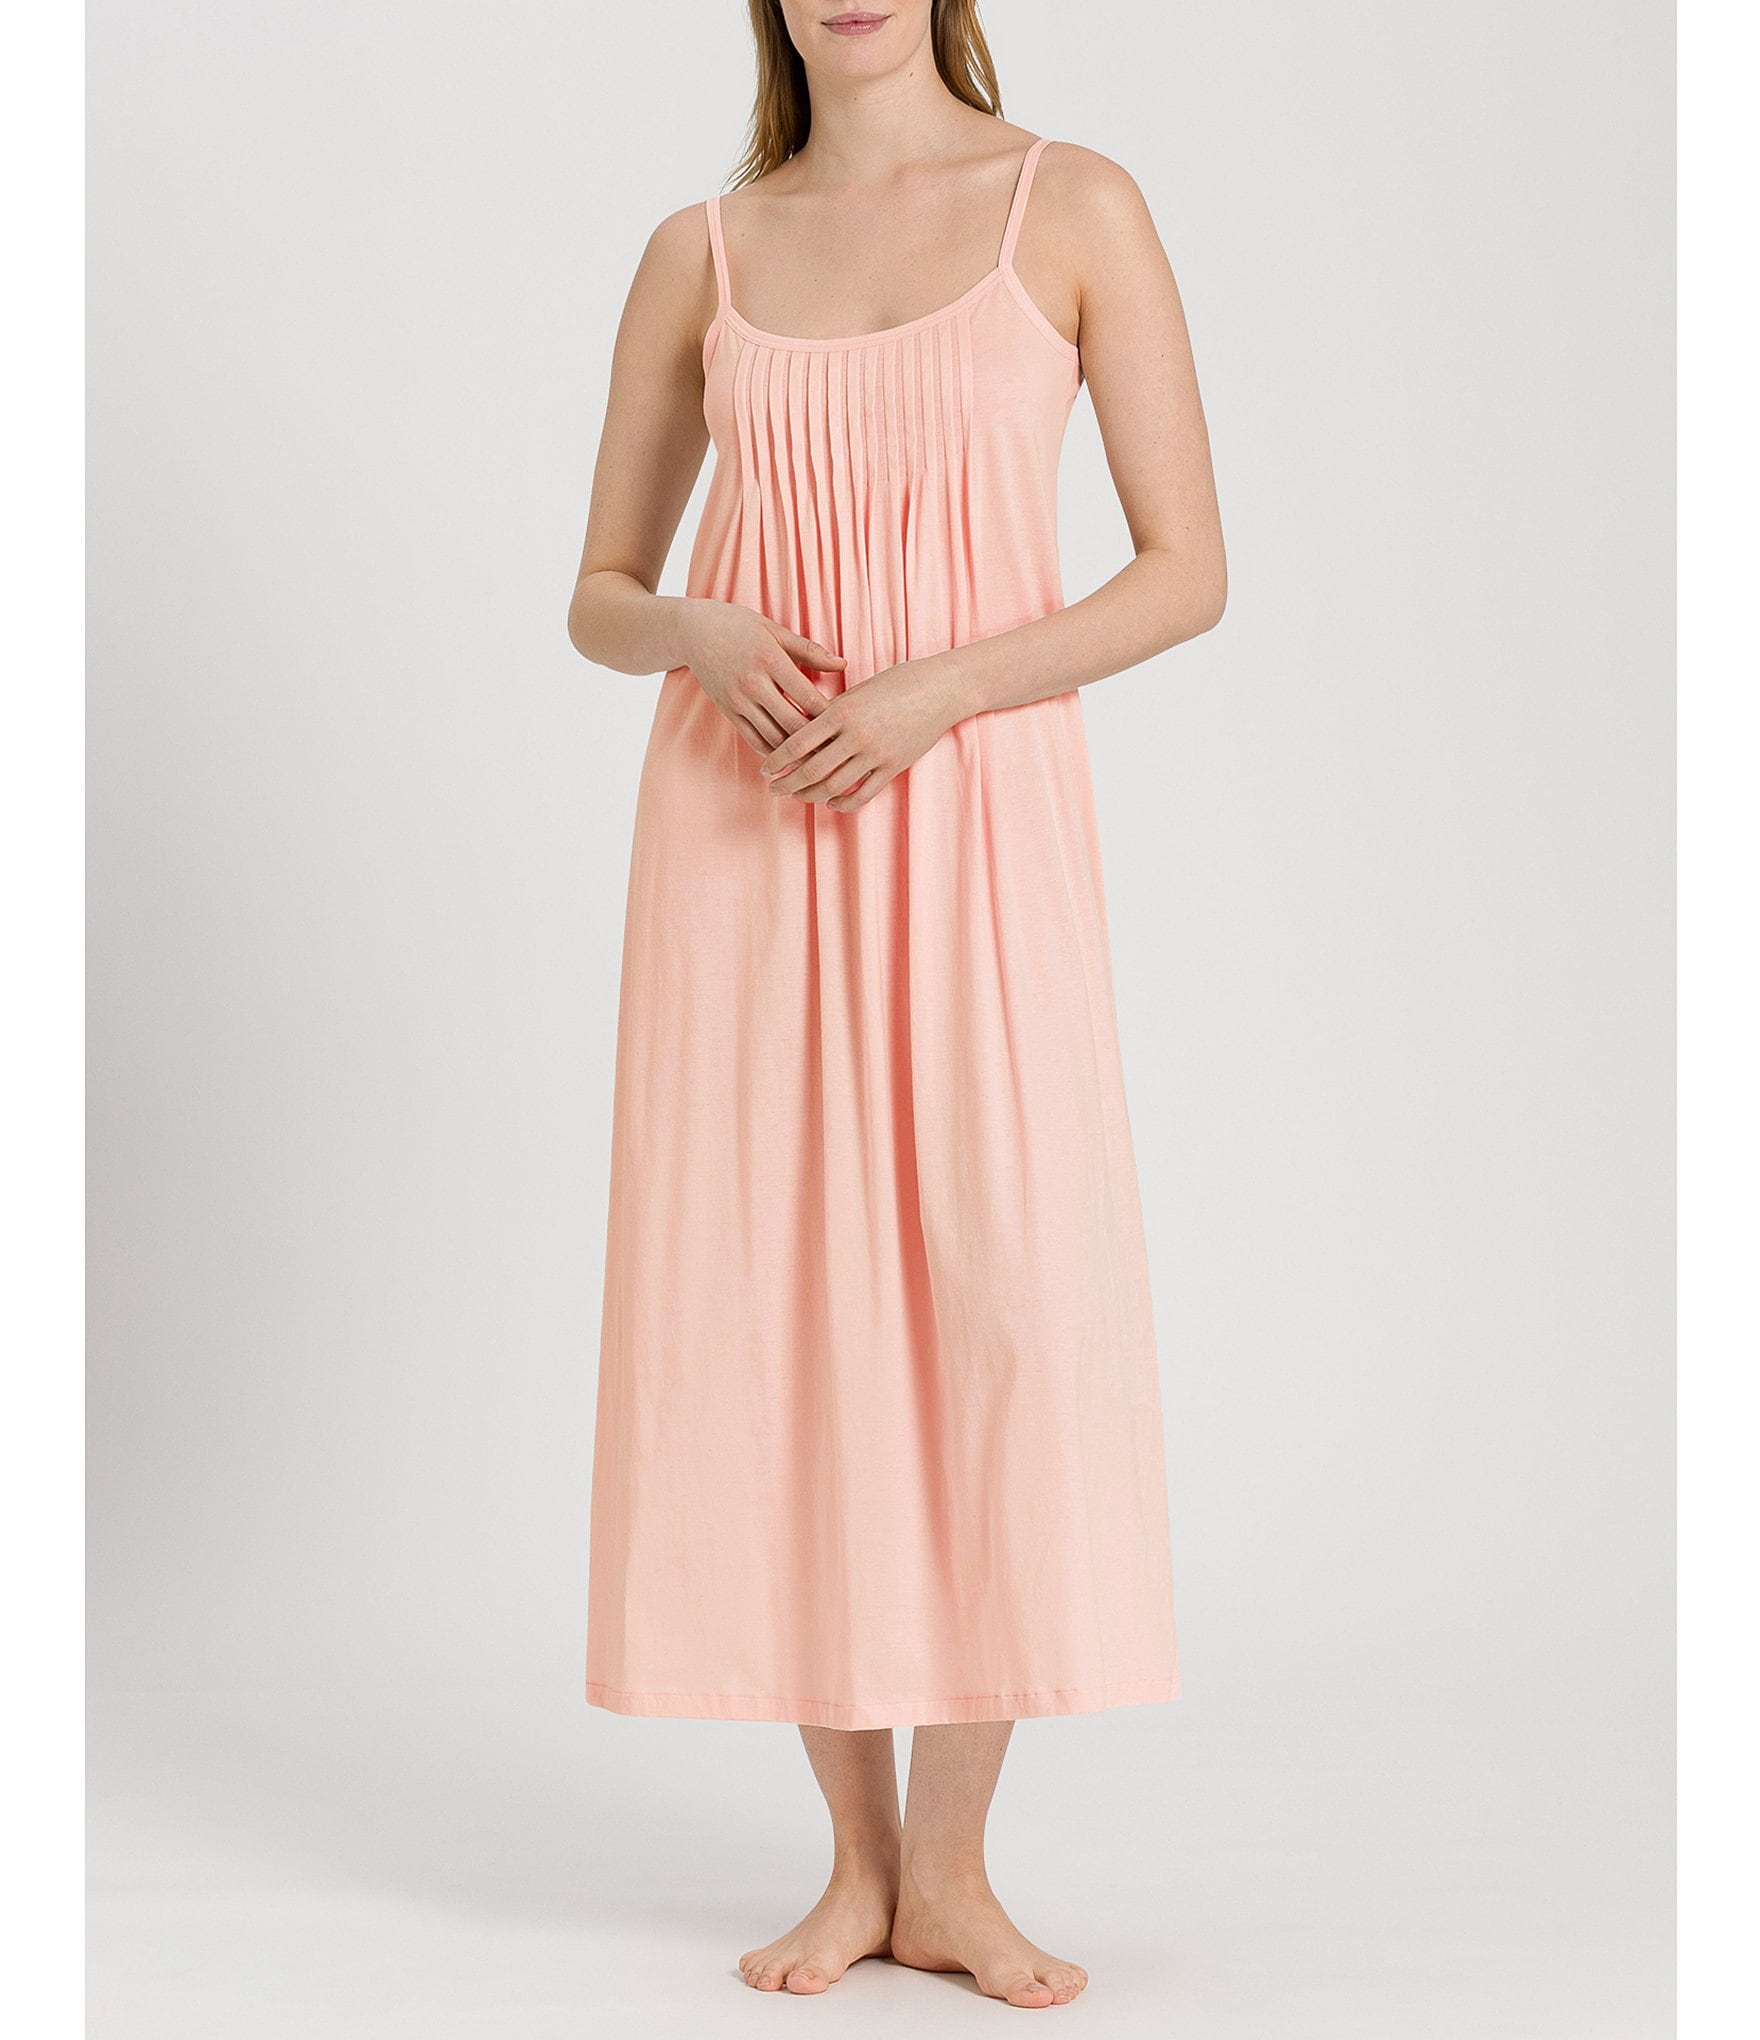 cotton knit sleeveless nightgown Hot Sale - OFF 56%